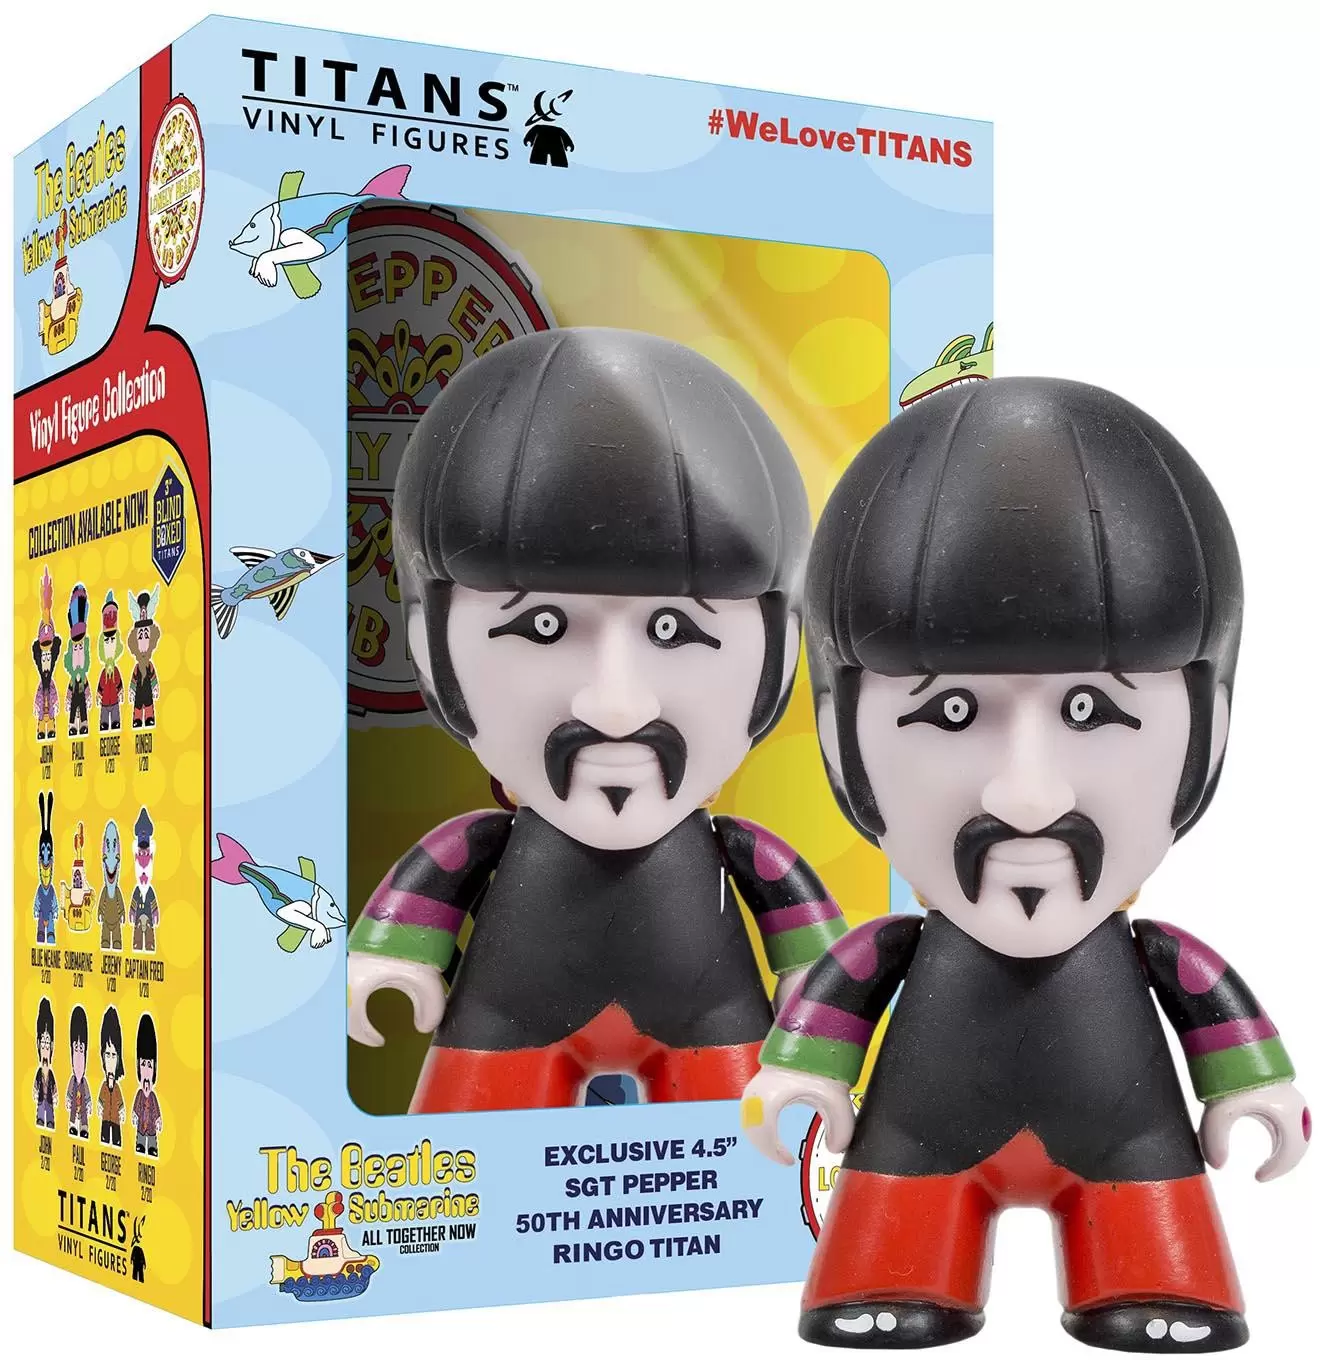 TITANS Big Sizes, Pack and Exclusives - The Beatles TITANS - 4.5\